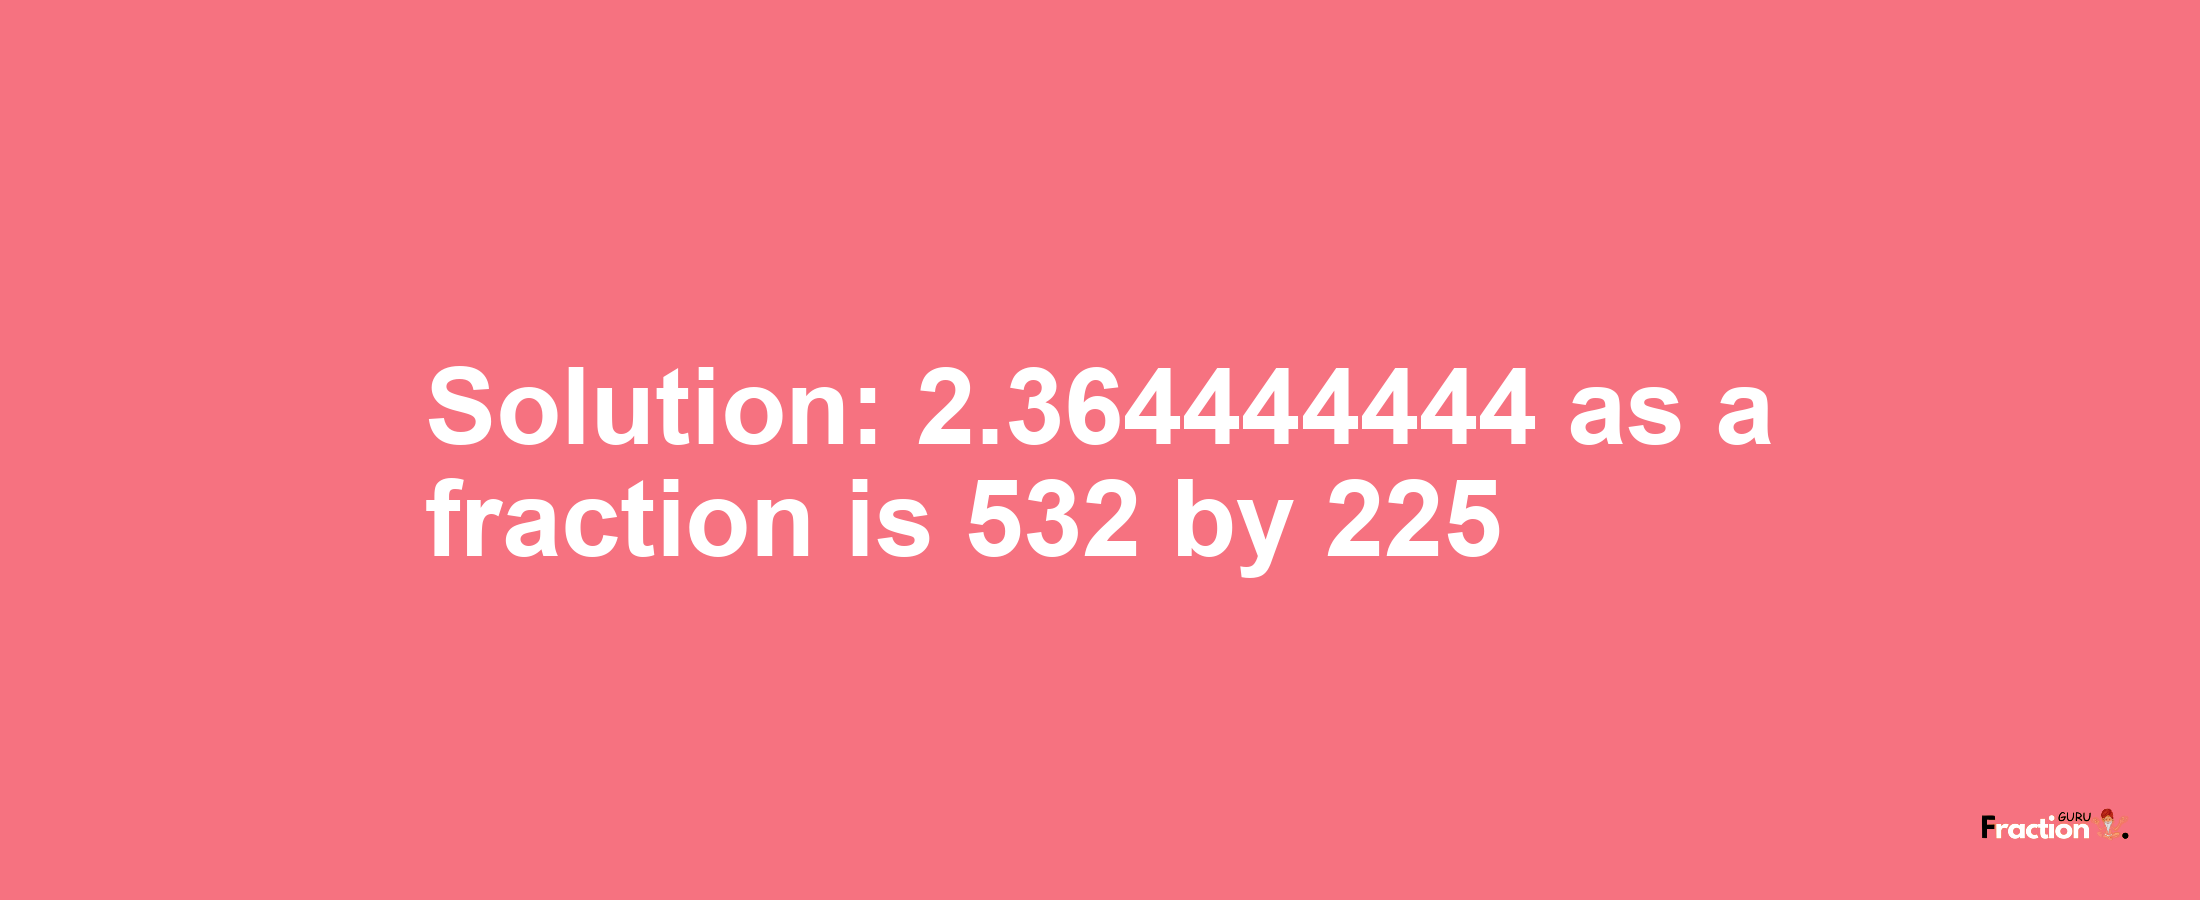 Solution:2.364444444 as a fraction is 532/225